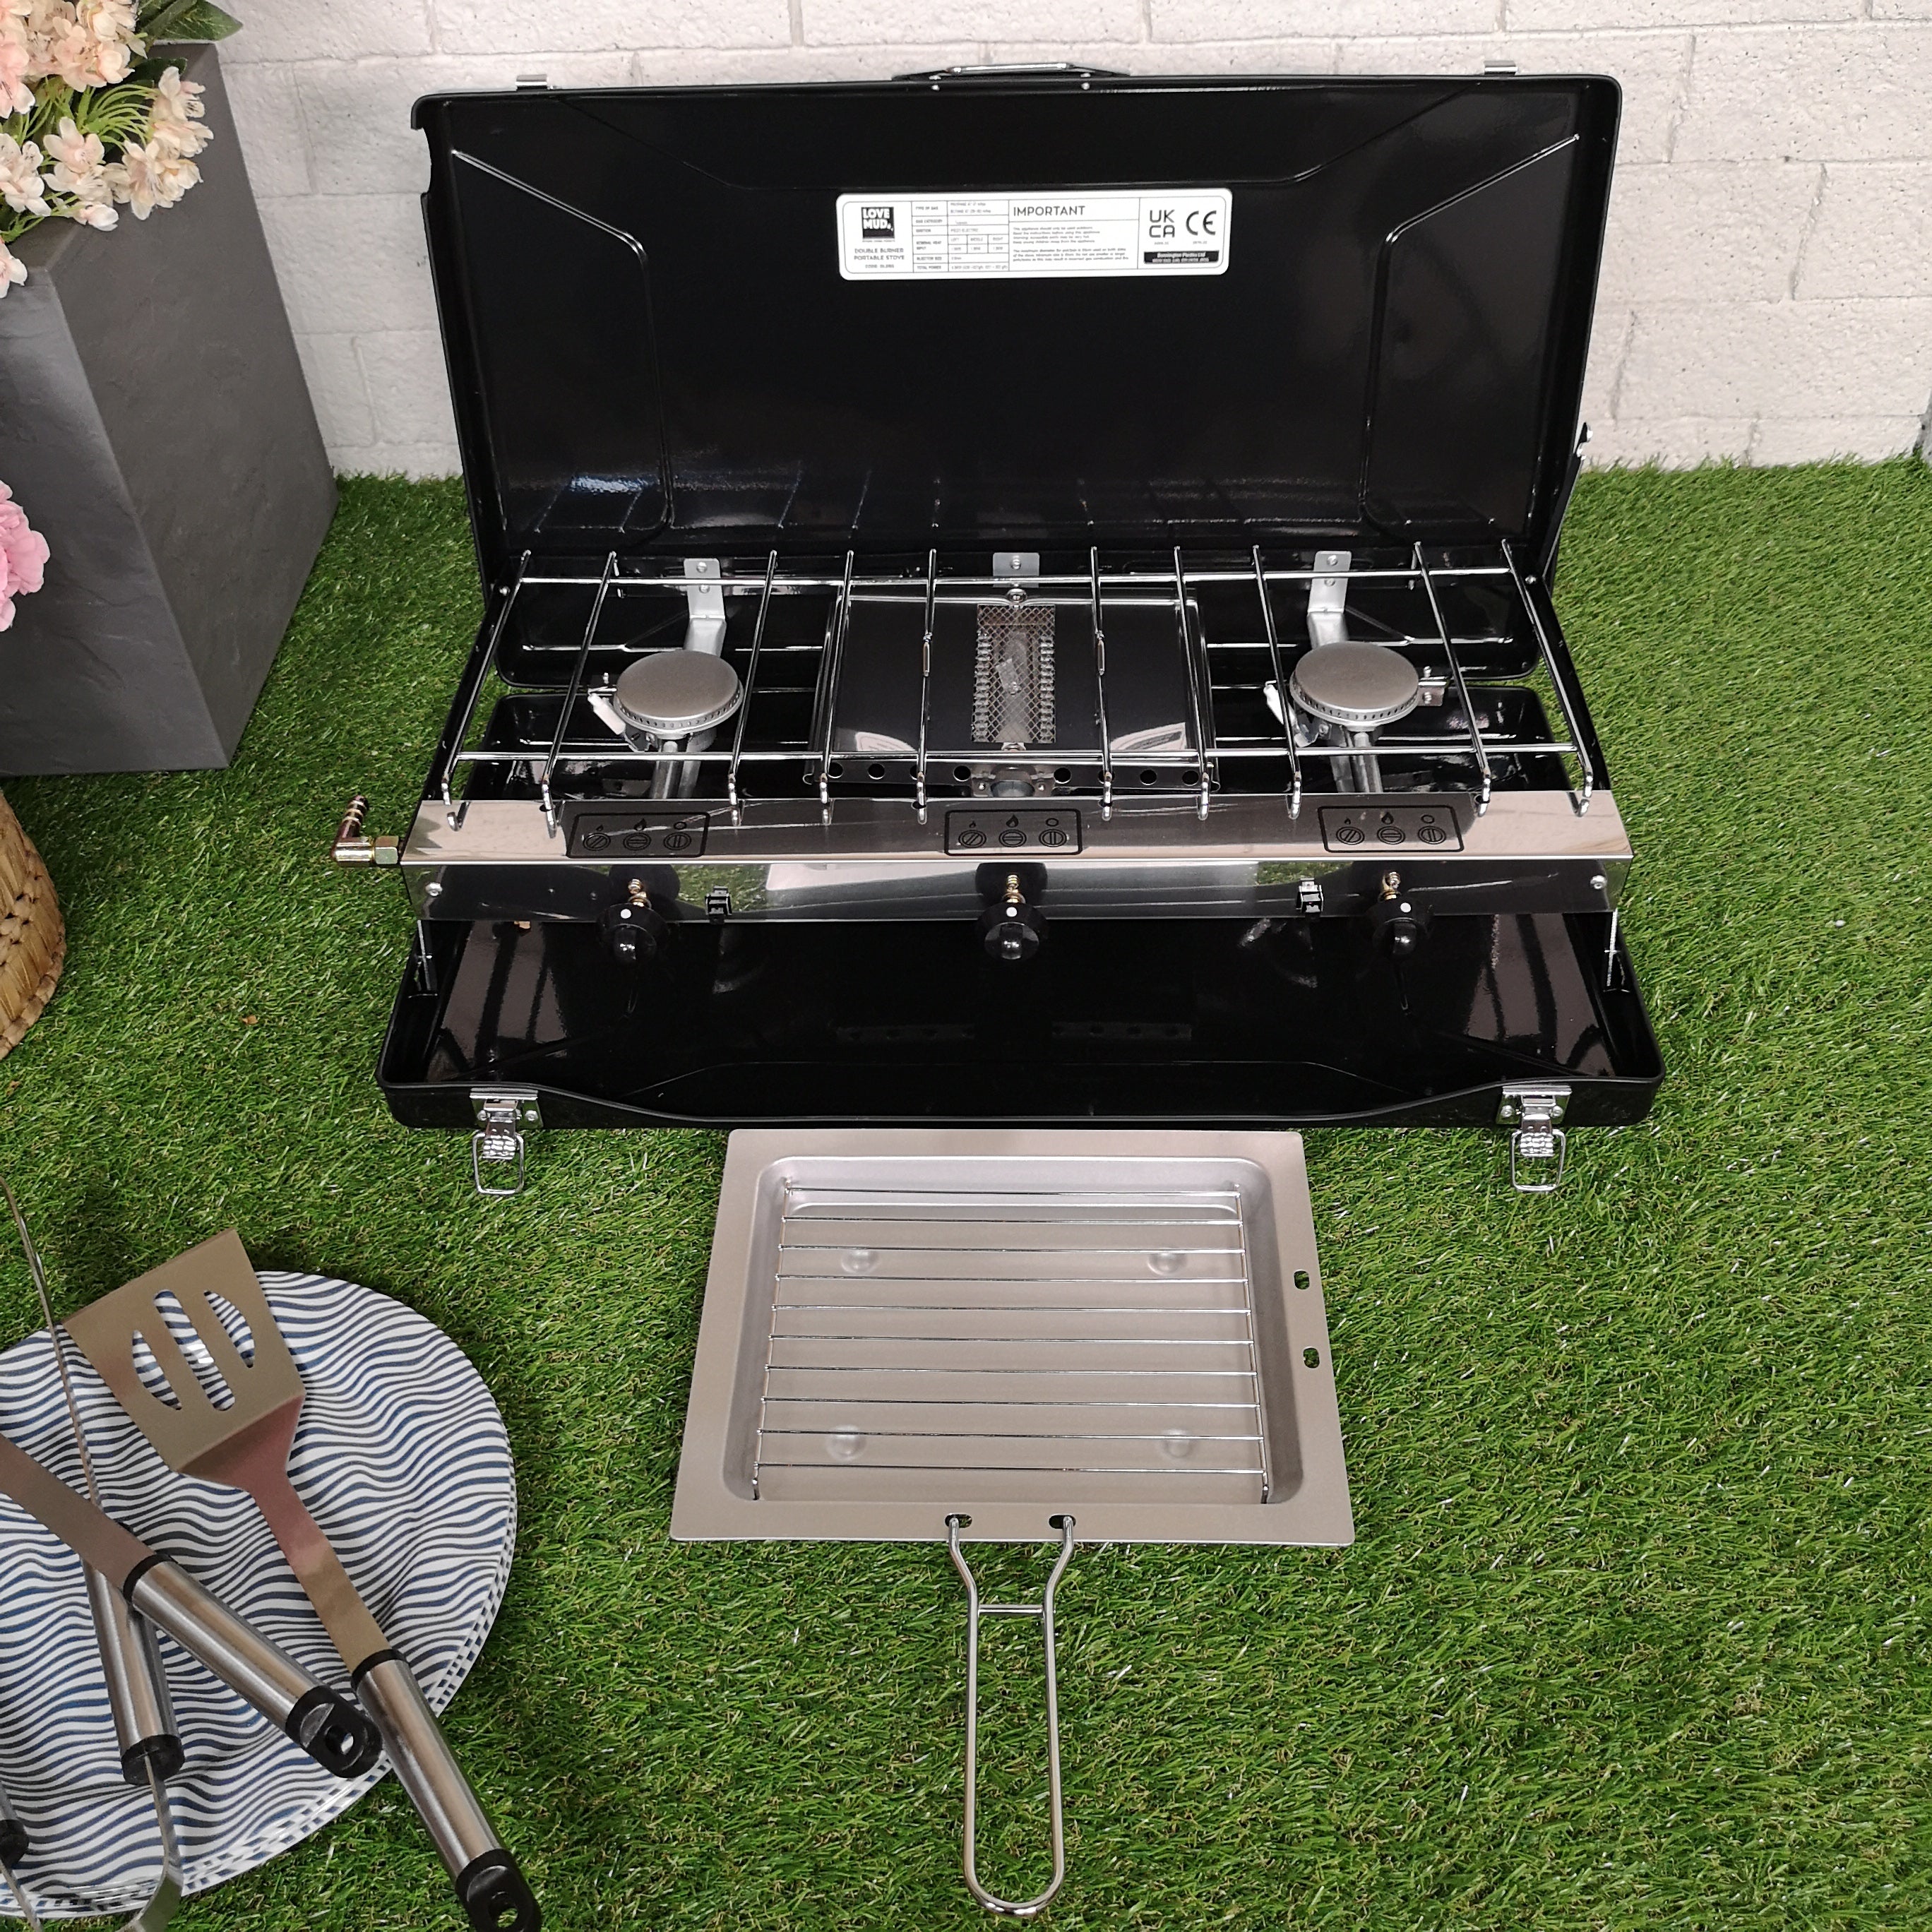 Portable Gas Dual Double 2 Burner Camping Stove & Grill with Toast Rack